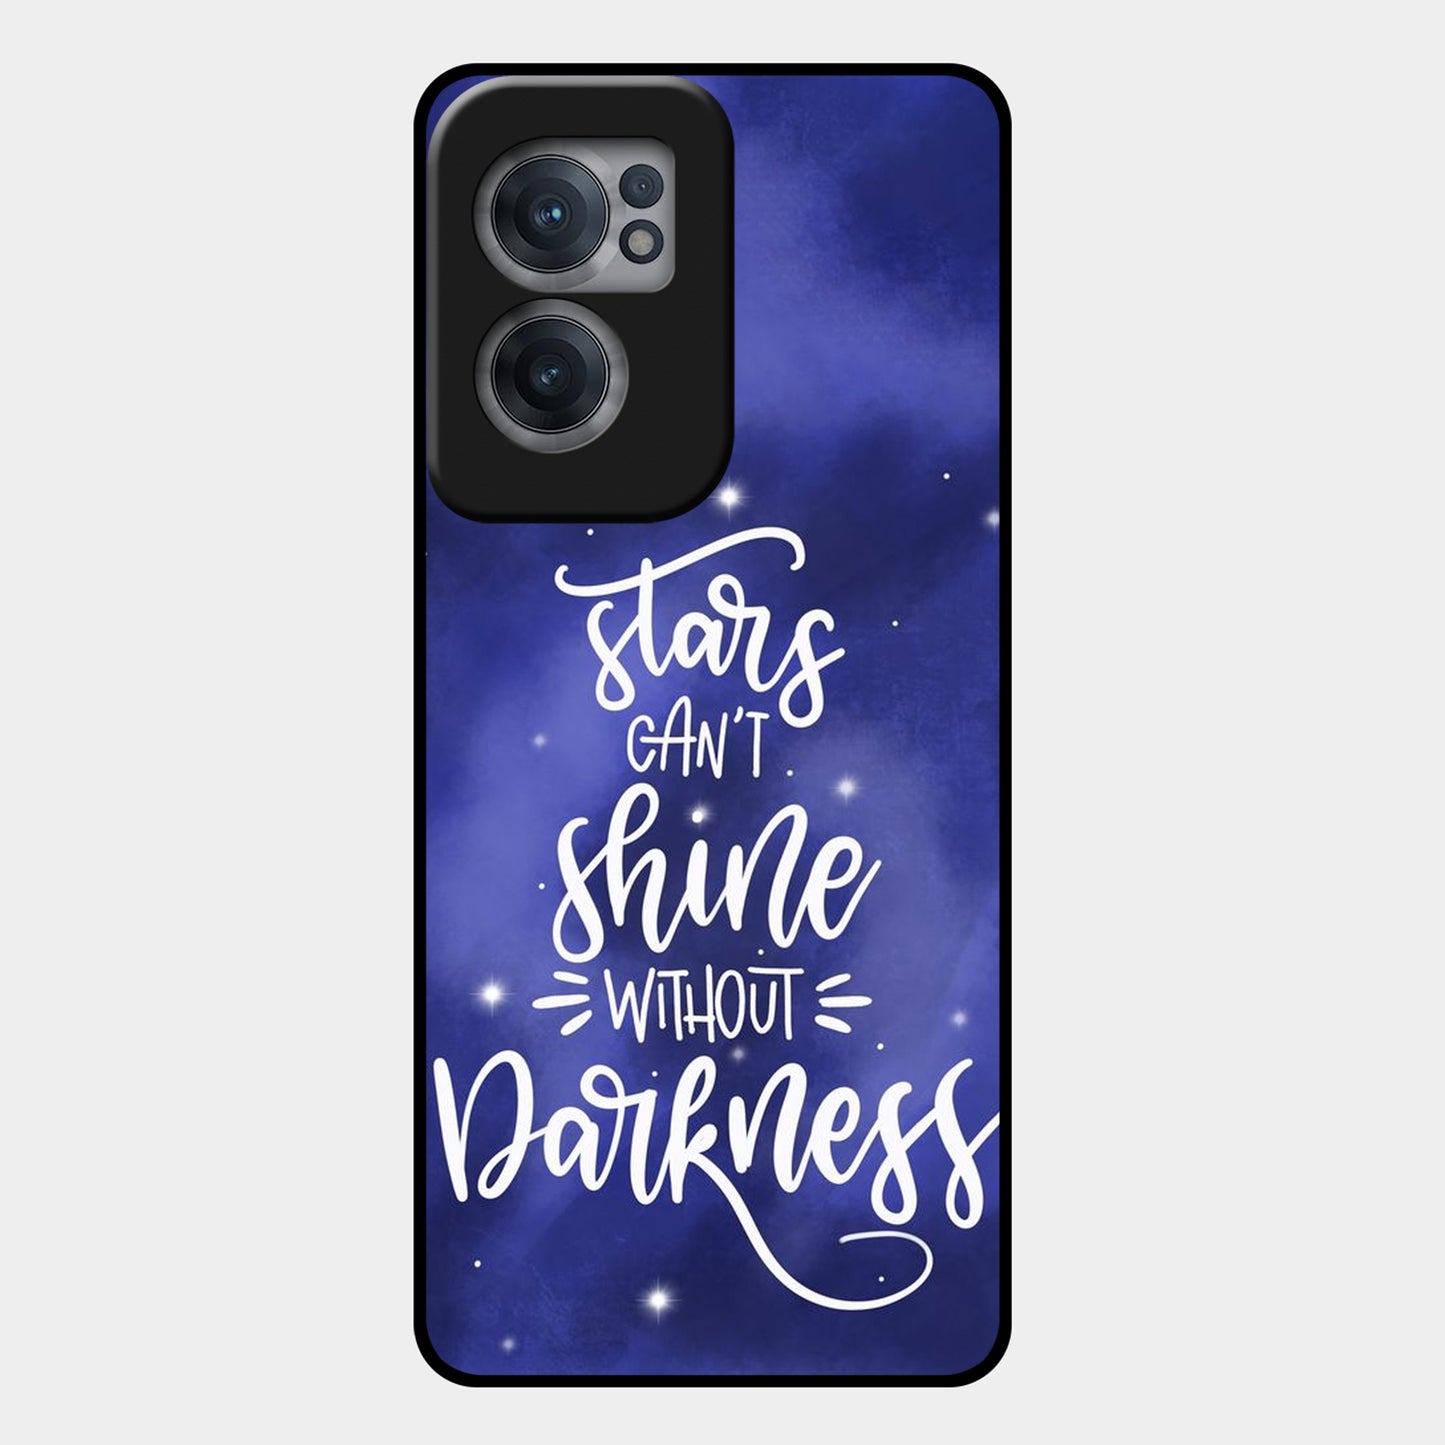 Star Glossy Metal Case Cover For OnePlus